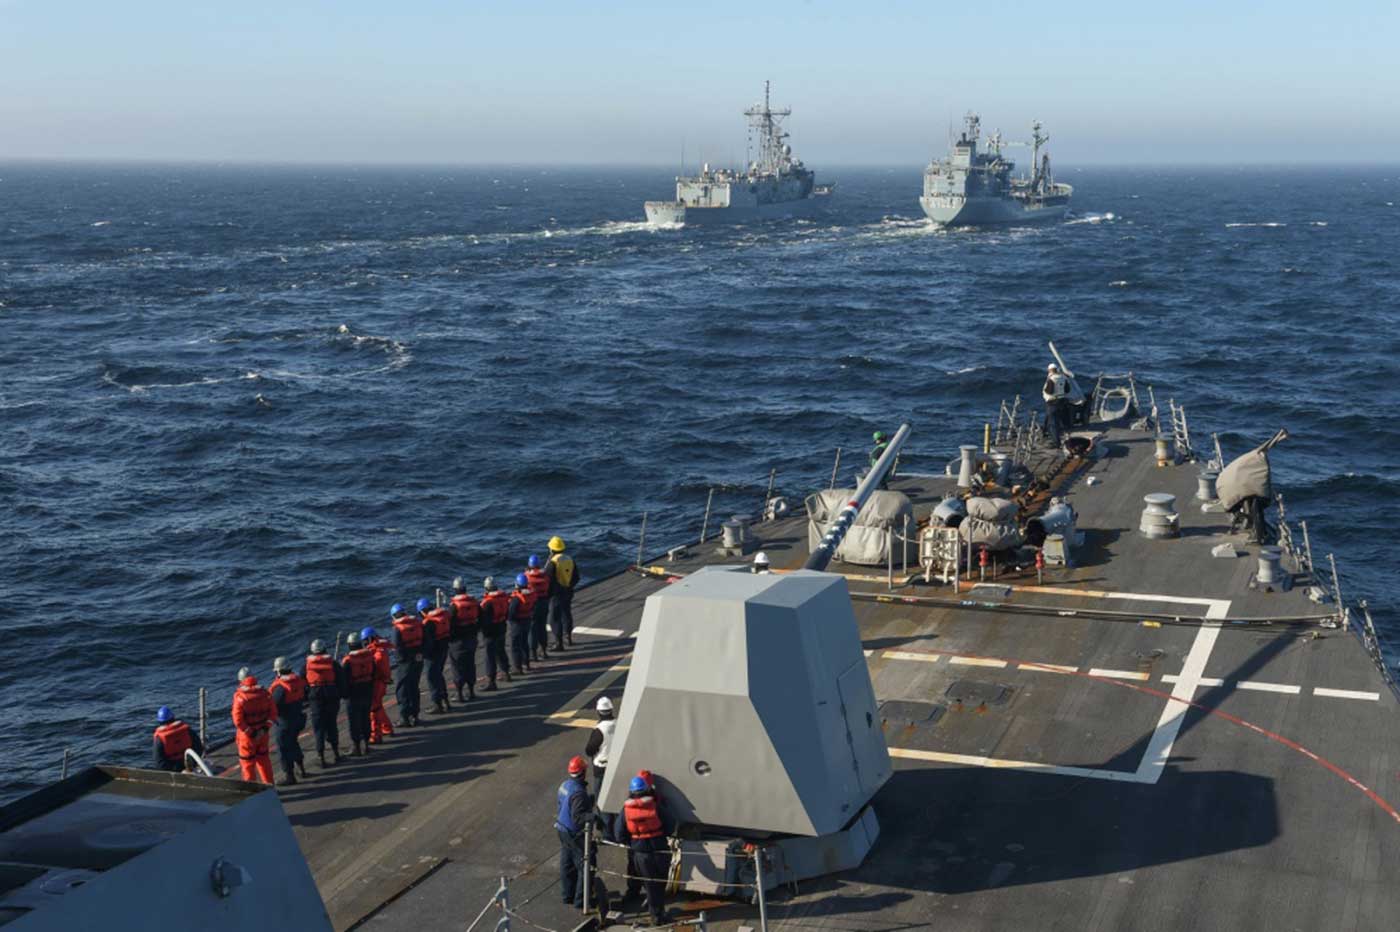 Baltic Sea (Feb. 28, 2019) The guided-missile destroyer USS Gravely (DDG 107) approaches the German navy replenishment tanker FGS Spessart (A 1442) in preparation for a replenishment at sea. Gravely is underway on a regularly-scheduled deployment as the flagship of Standing NATO Maritime Group 1 to conduct maritime operations and provide a continuous maritime capability for NATO in the northern Atlantic -- U.S. Navy photo by MCS 2nd Class Mark Andrew Hays. -